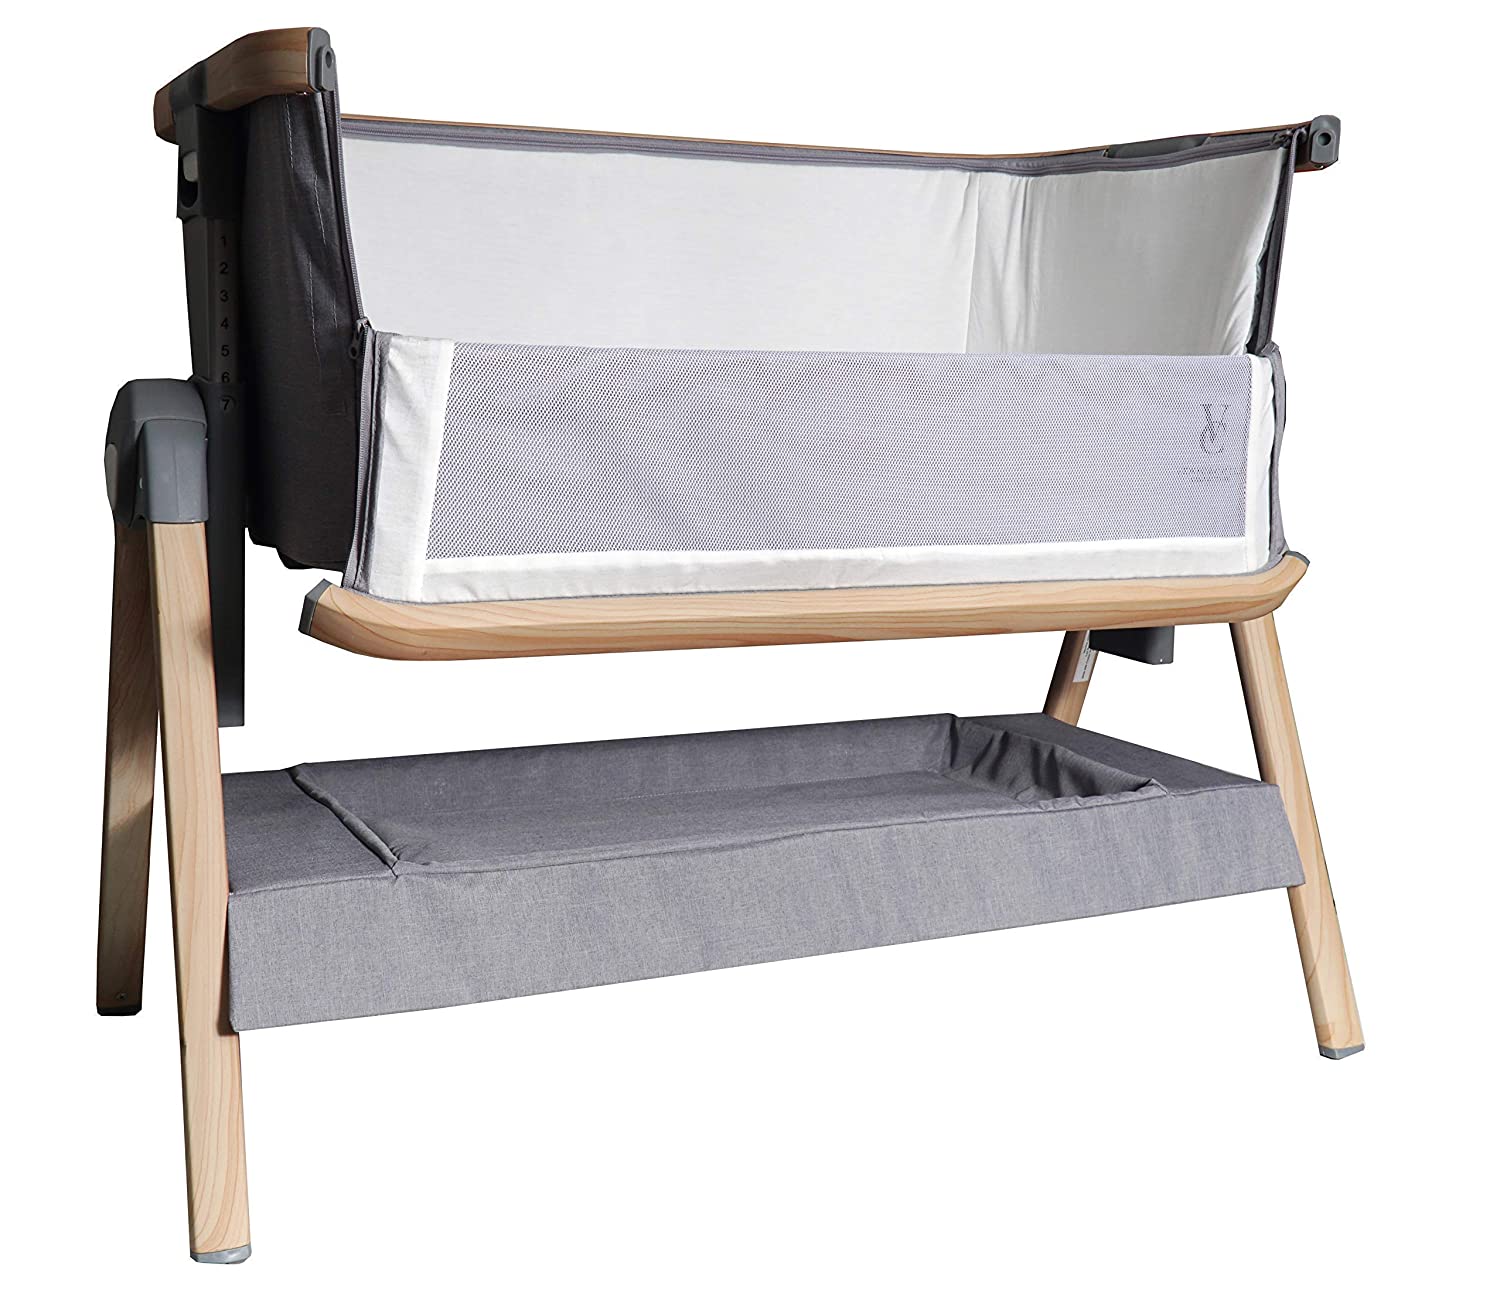 VENICE CHILD Bed Side Crib for Baby - Sleeper Bassinet w/ Travel Case, Removable Bamboo Vicose Liner